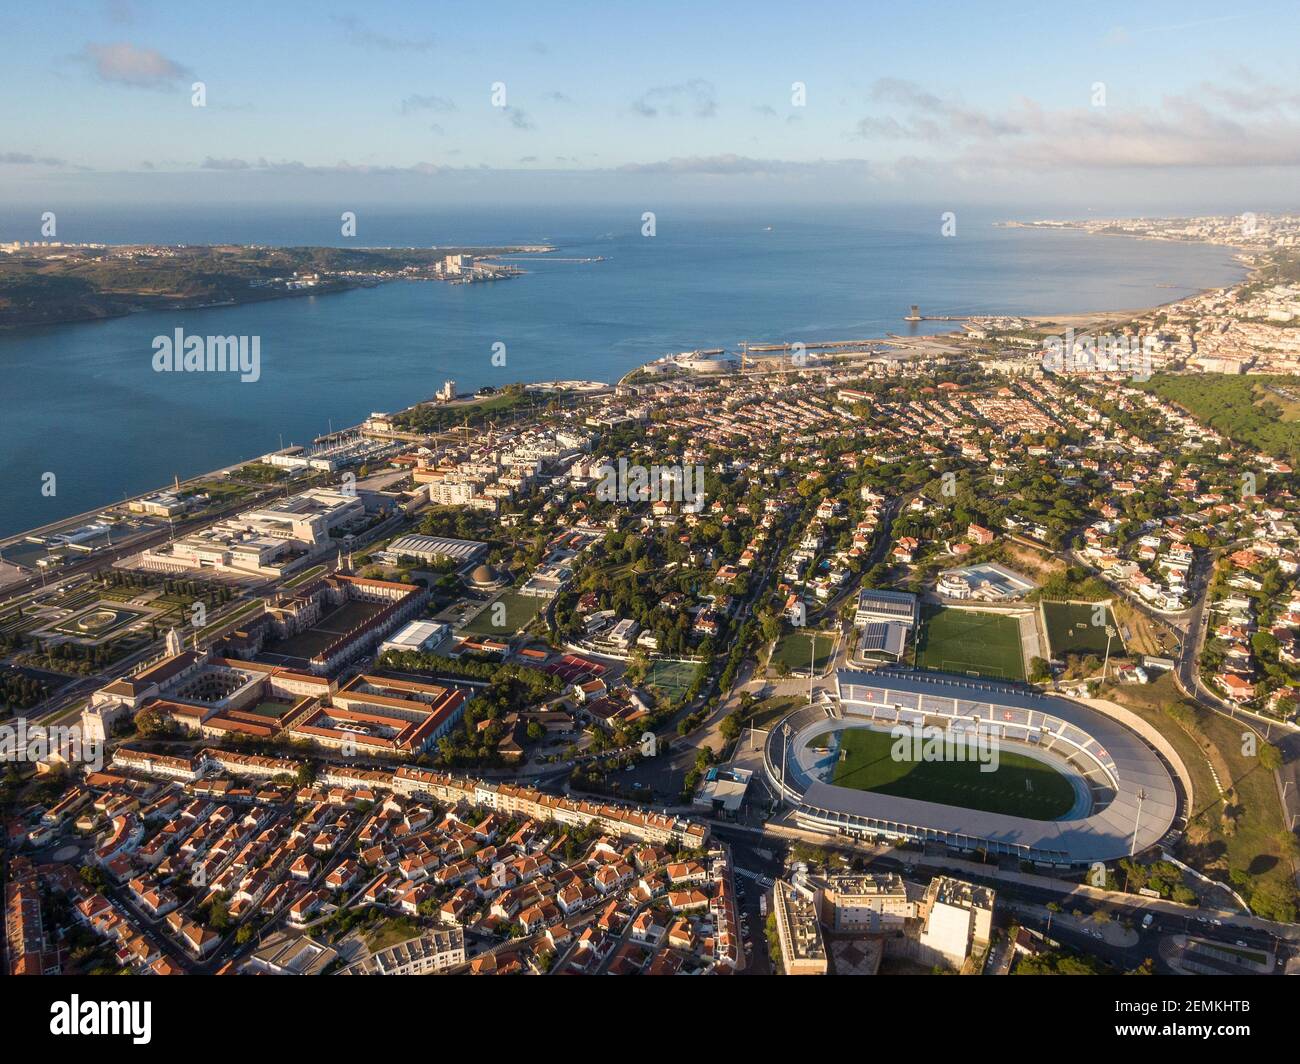 Aerial view of the historic Belem District and Tagus River at sunrise in Lisbon, Portugal. Stock Photo